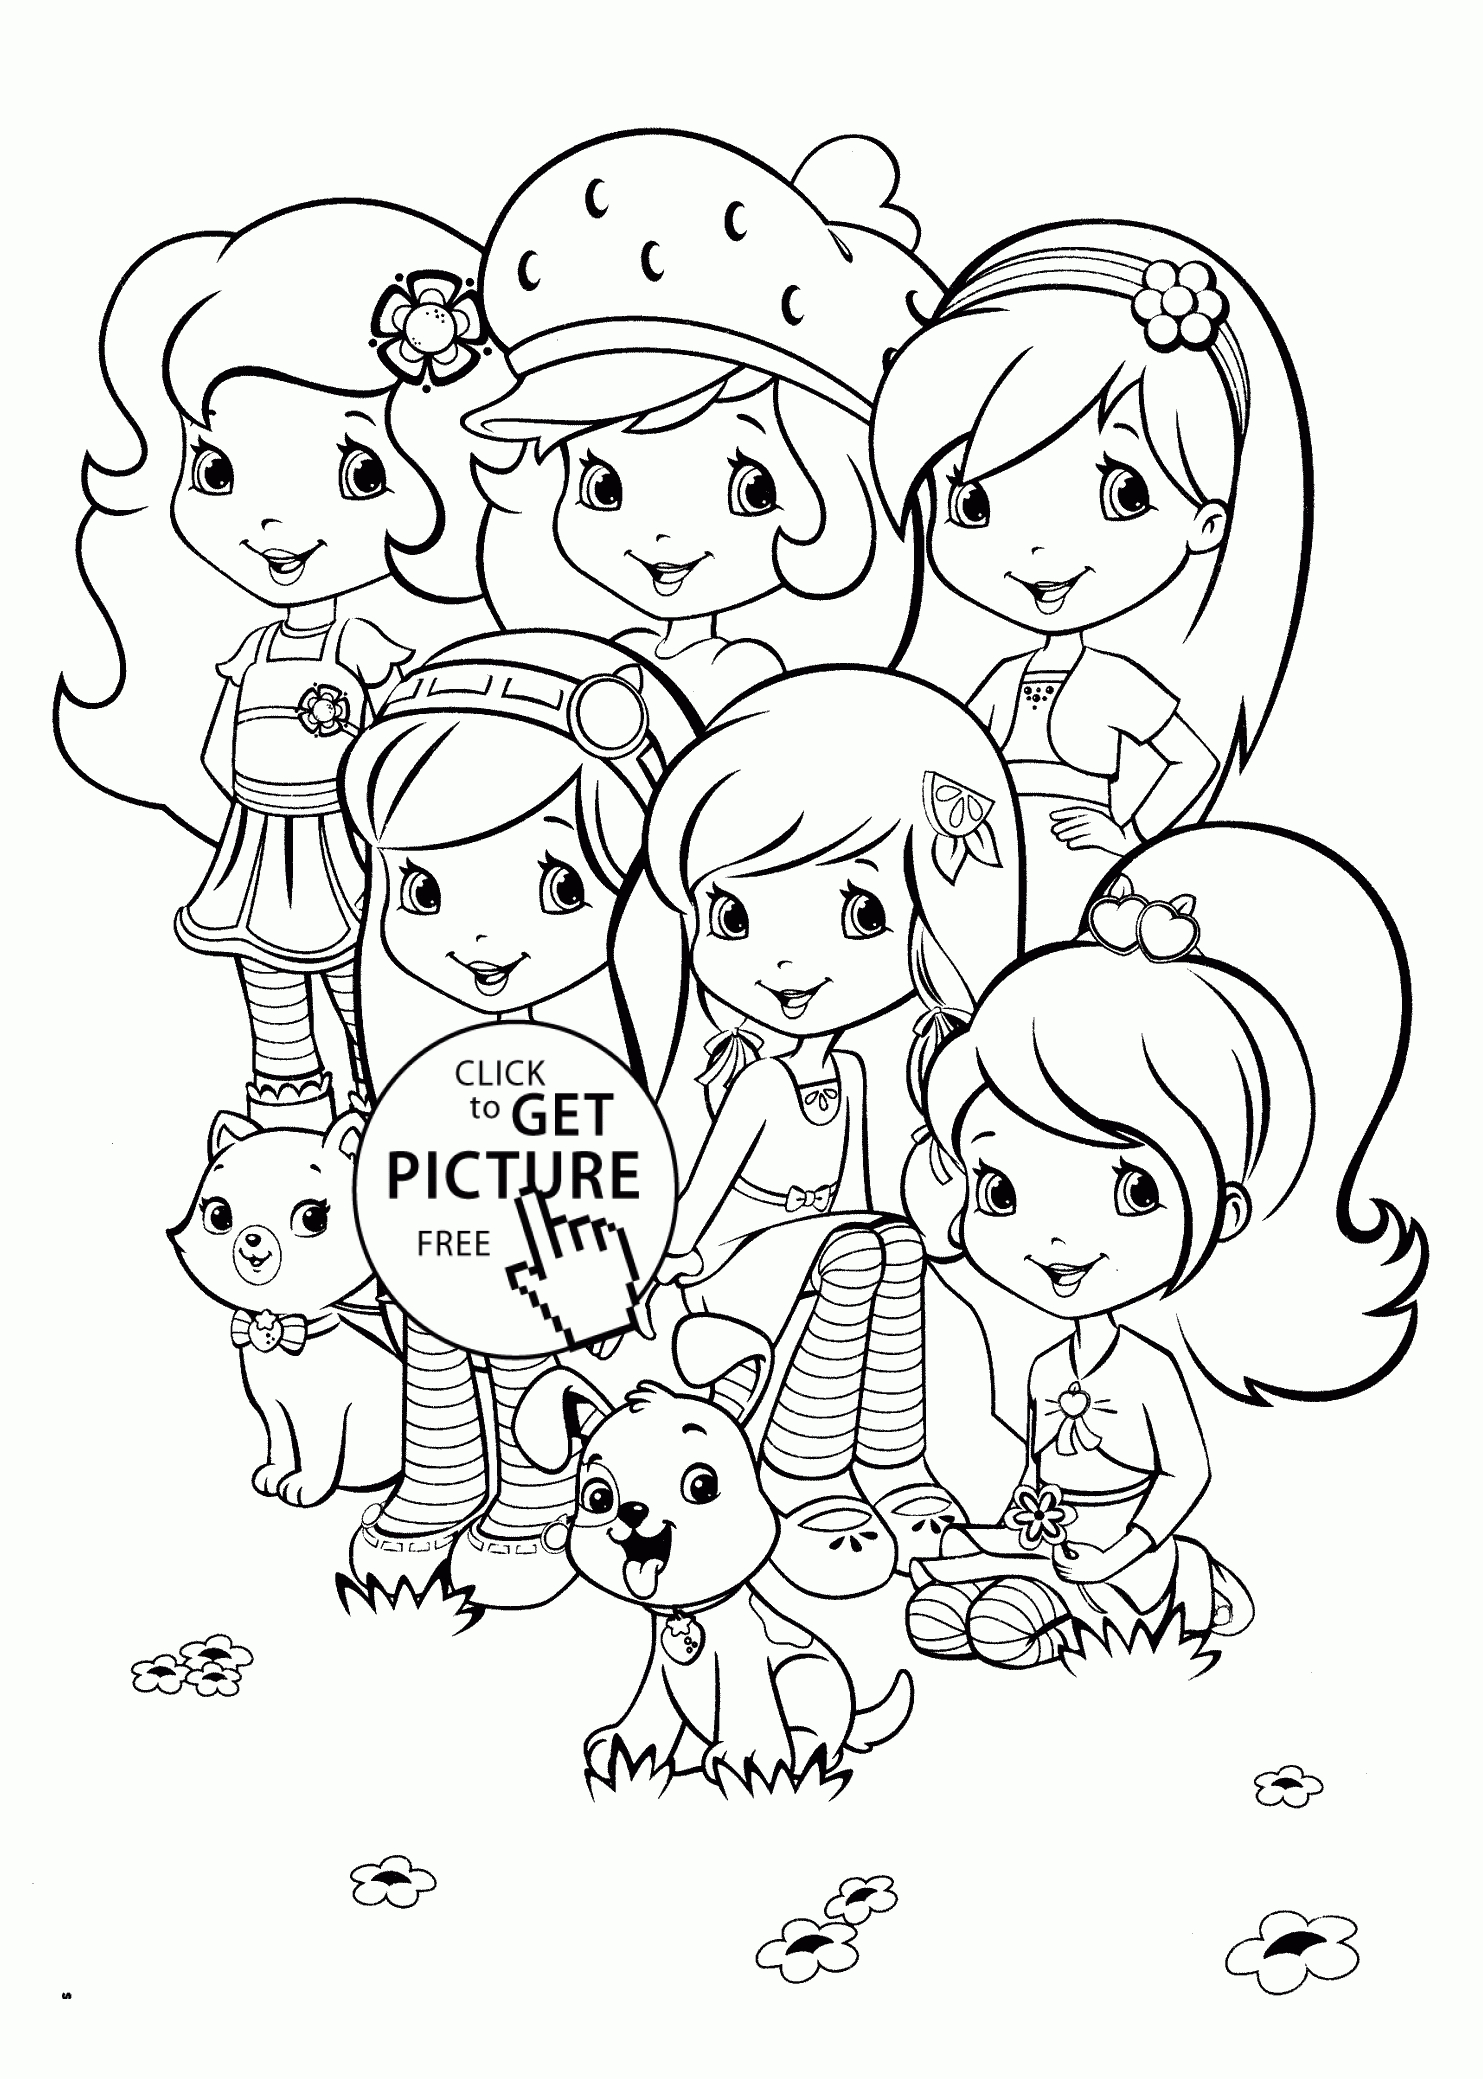 Coloring Pages : Teamrawberry Shortcake Coloring Pages For Kids - Strawberry Shortcake Coloring Pages Free Printable